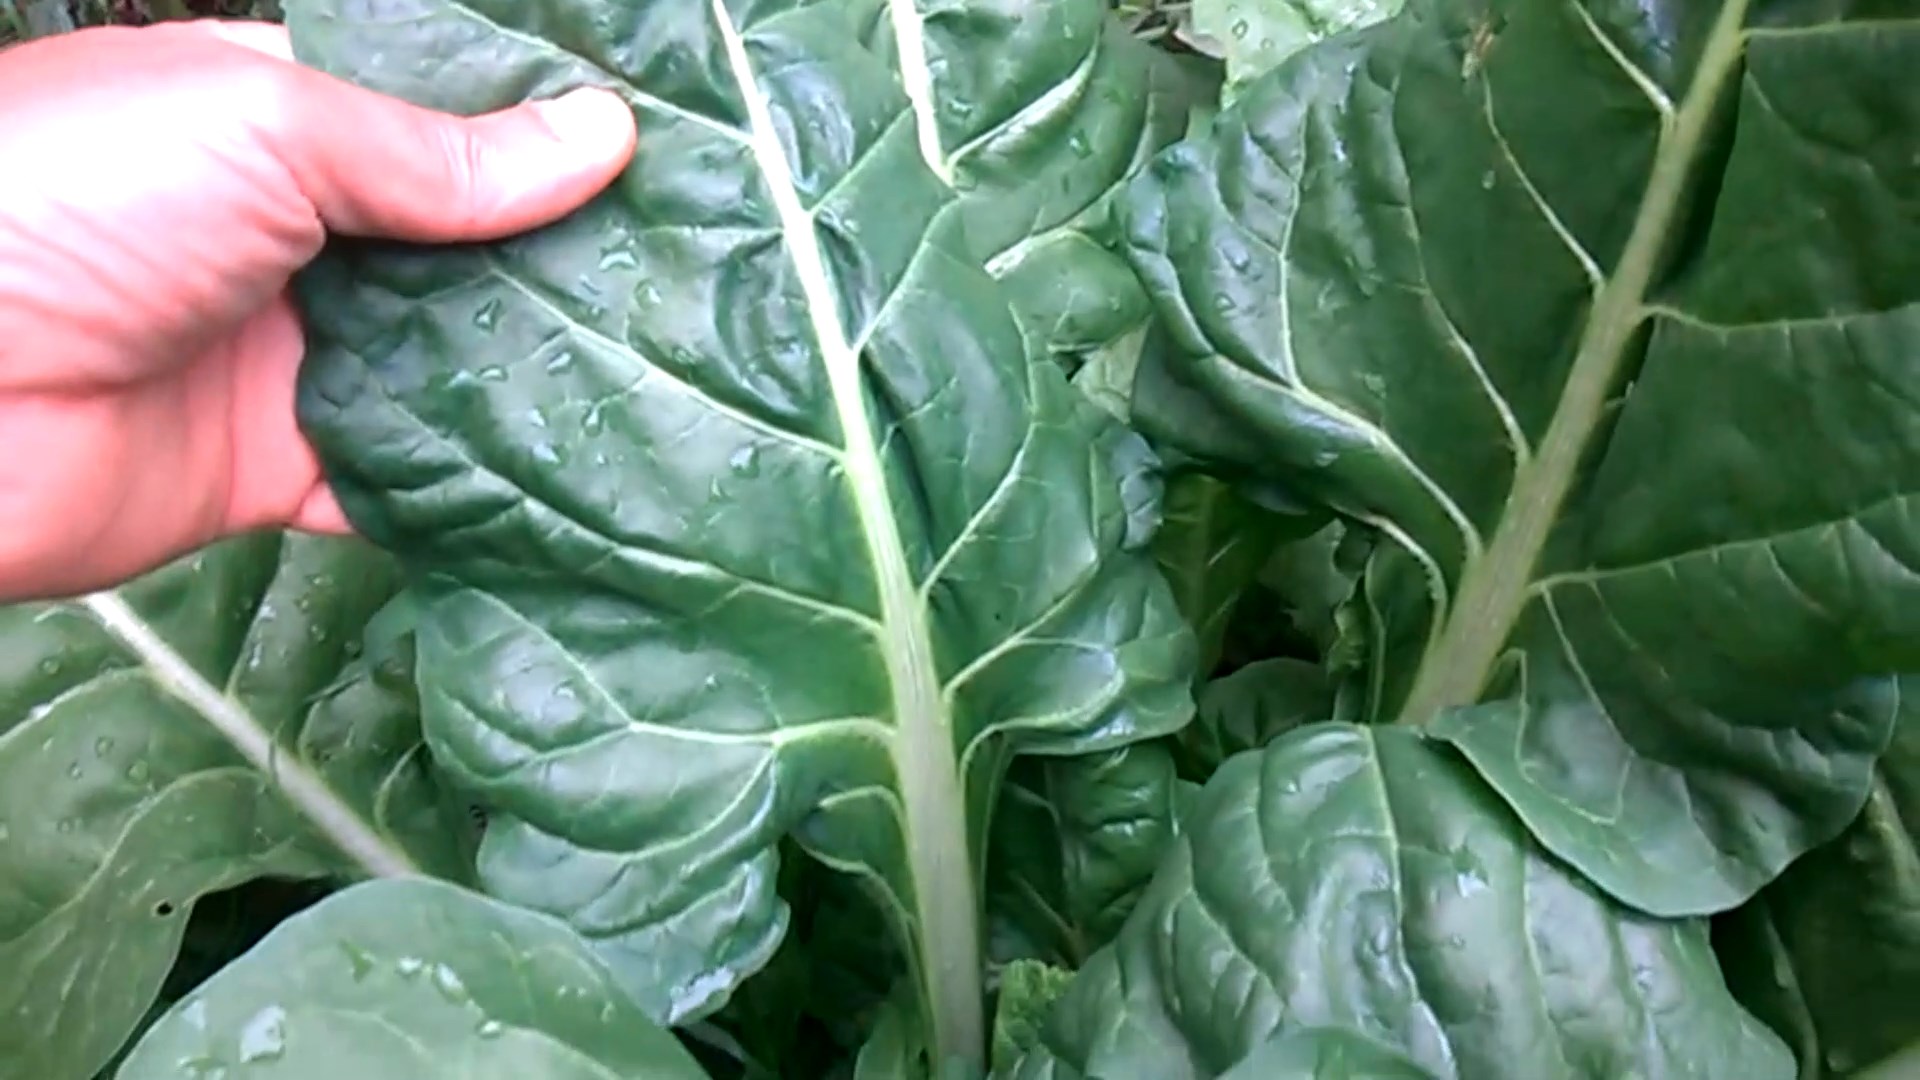 Chard is delicious, nutritious and easy to grow. Chard is a leafy vegetable closely related to garden beets. Chard is known by a number of different names in including Swiss Chard, Spinach Beet,and Leaf beet.